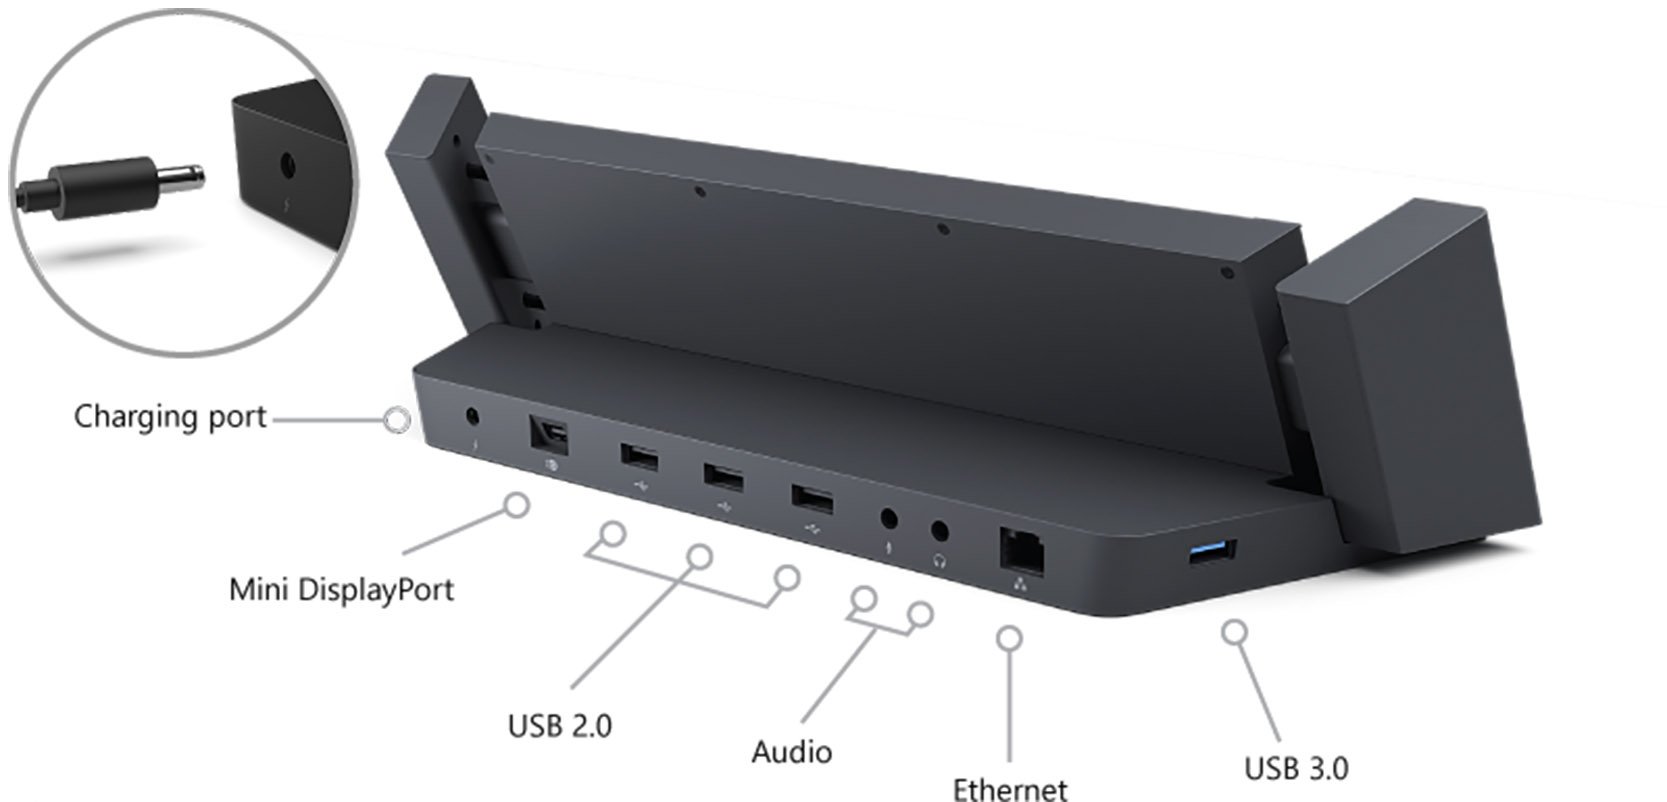 A Surface Pro 3 is shown from the front, with callout numbers identifying ports and other features.